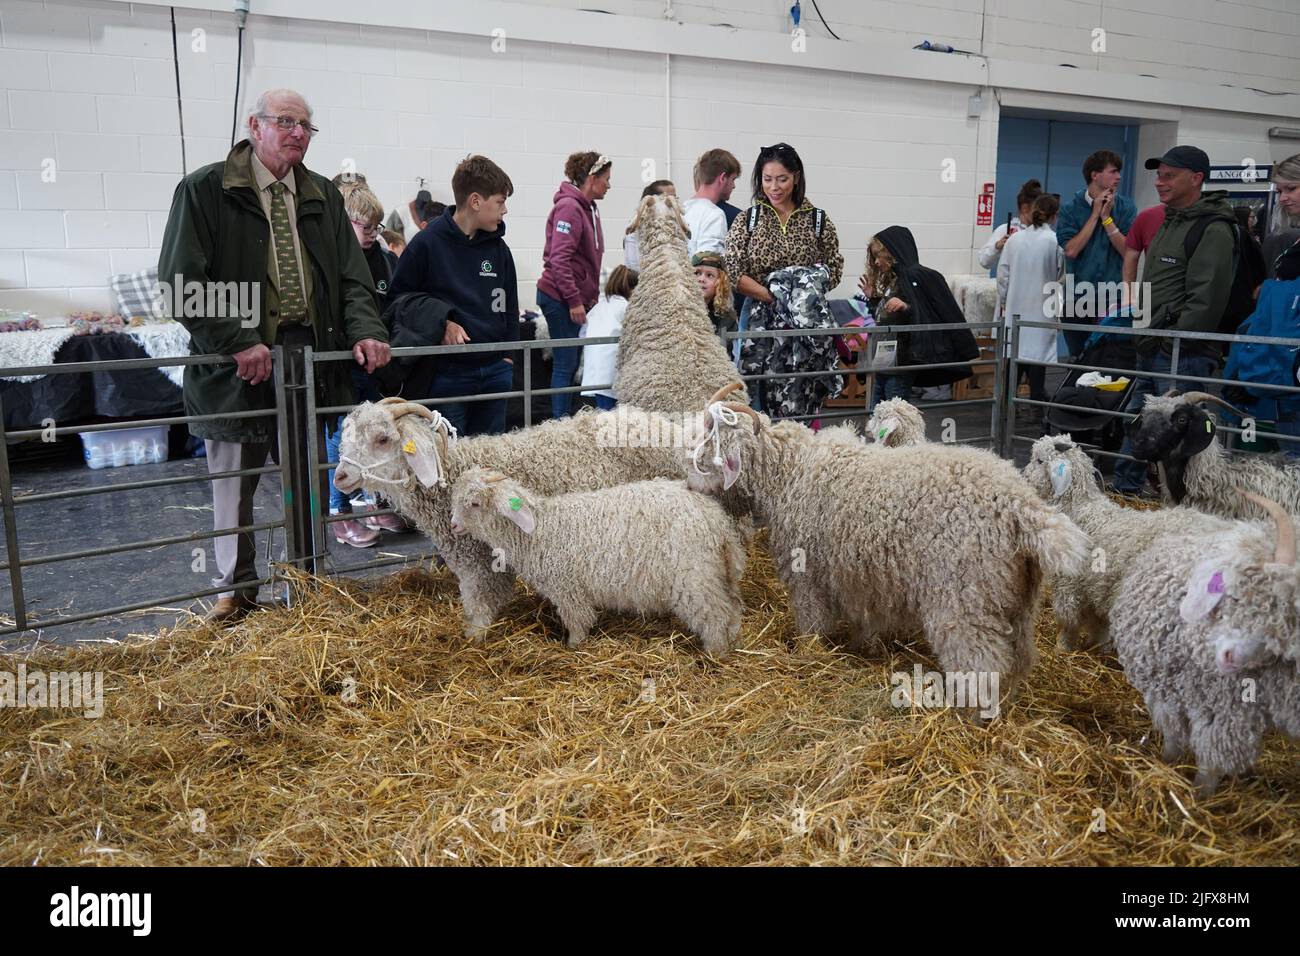 Exeter, UK - July 2022: Different breeds of cattle exhibited at the Devon County Show, Angora goat breed in picture Stock Photo